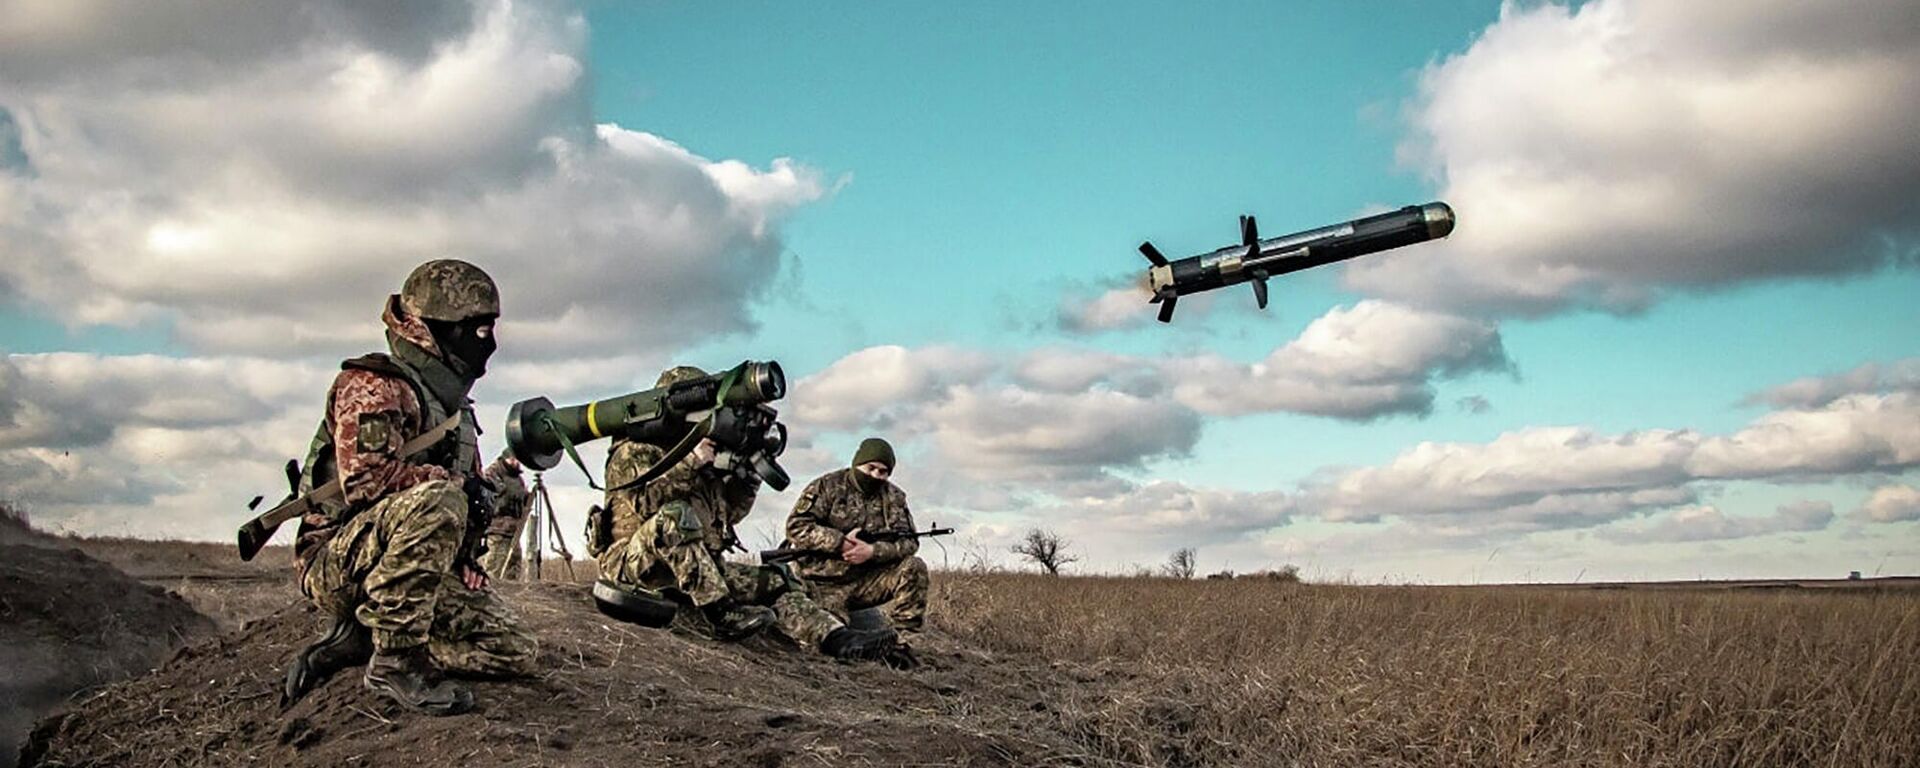 In this image released by the Ukrainian Defence Ministry Press Service, Ukrainian soldiers use a launcher with US Javelin missiles during military exercises in the Donetsk Region, Thursday, Dec. 23, 2021. - Sputnik International, 1920, 25.01.2022